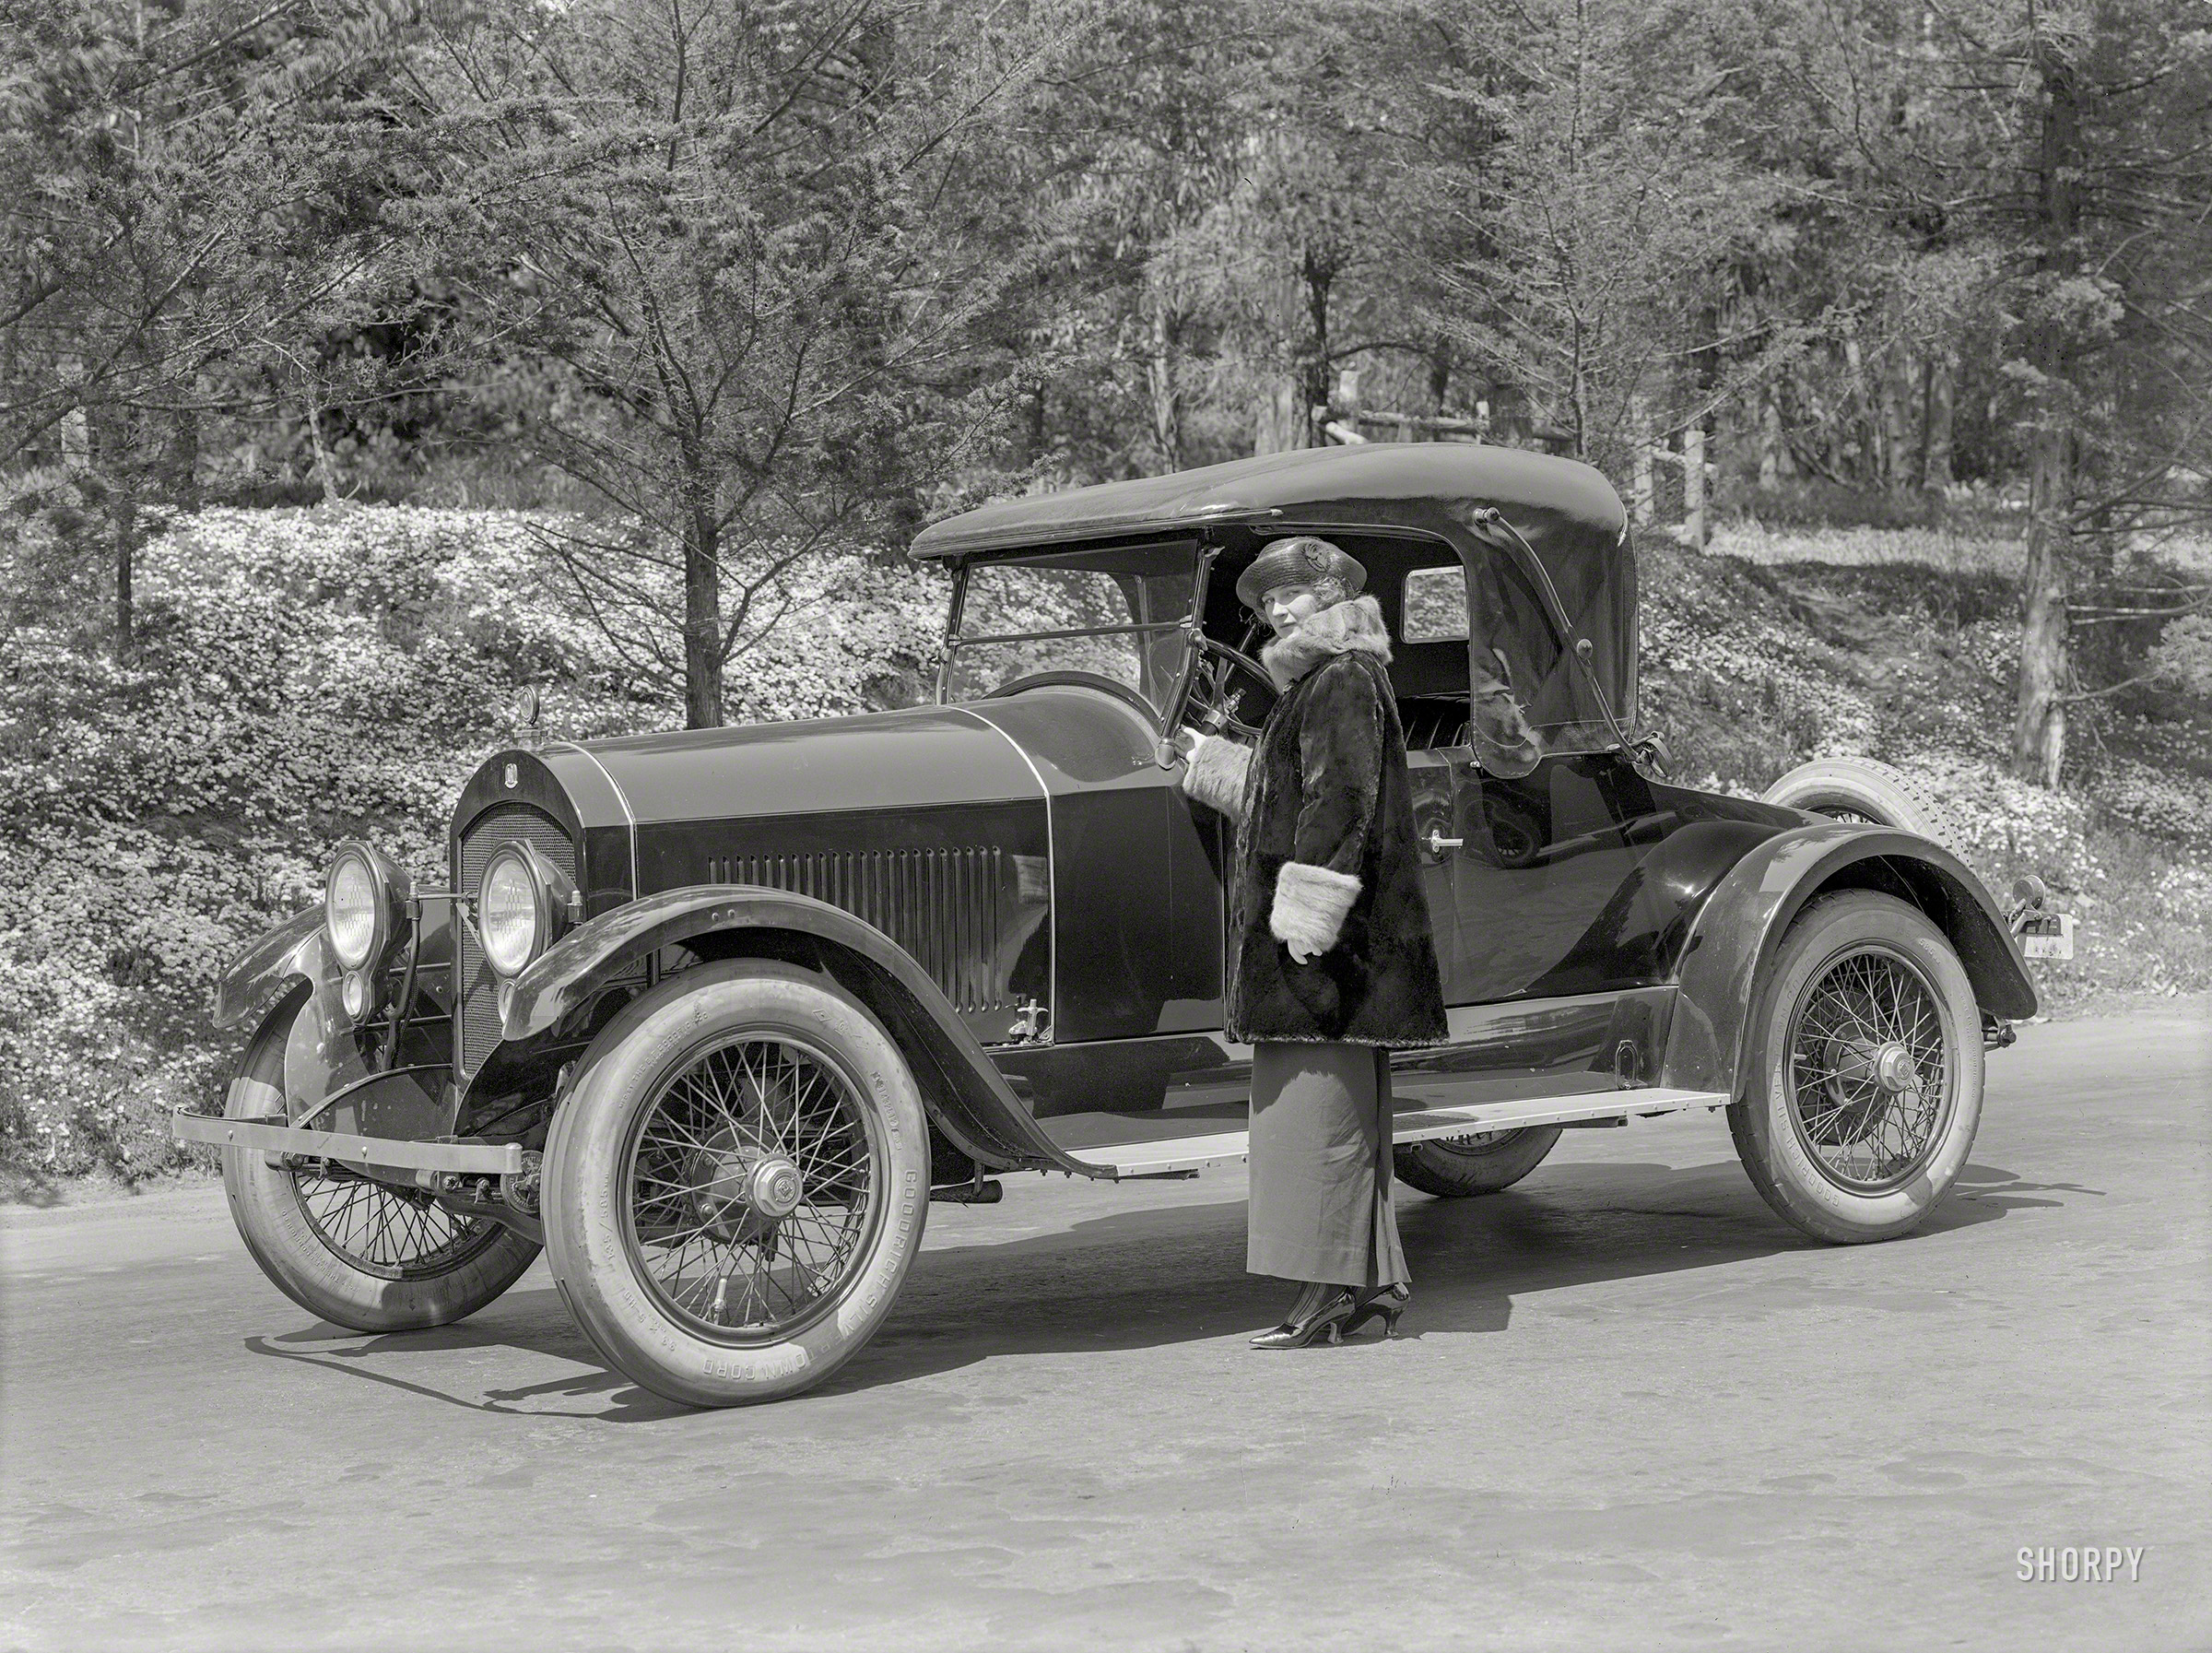 San Francisco circa 1920. "Cole Aero 8 roadster." A solid hit with this stylish miss. 5x7 glass negative by Christopher Helin. View full size.